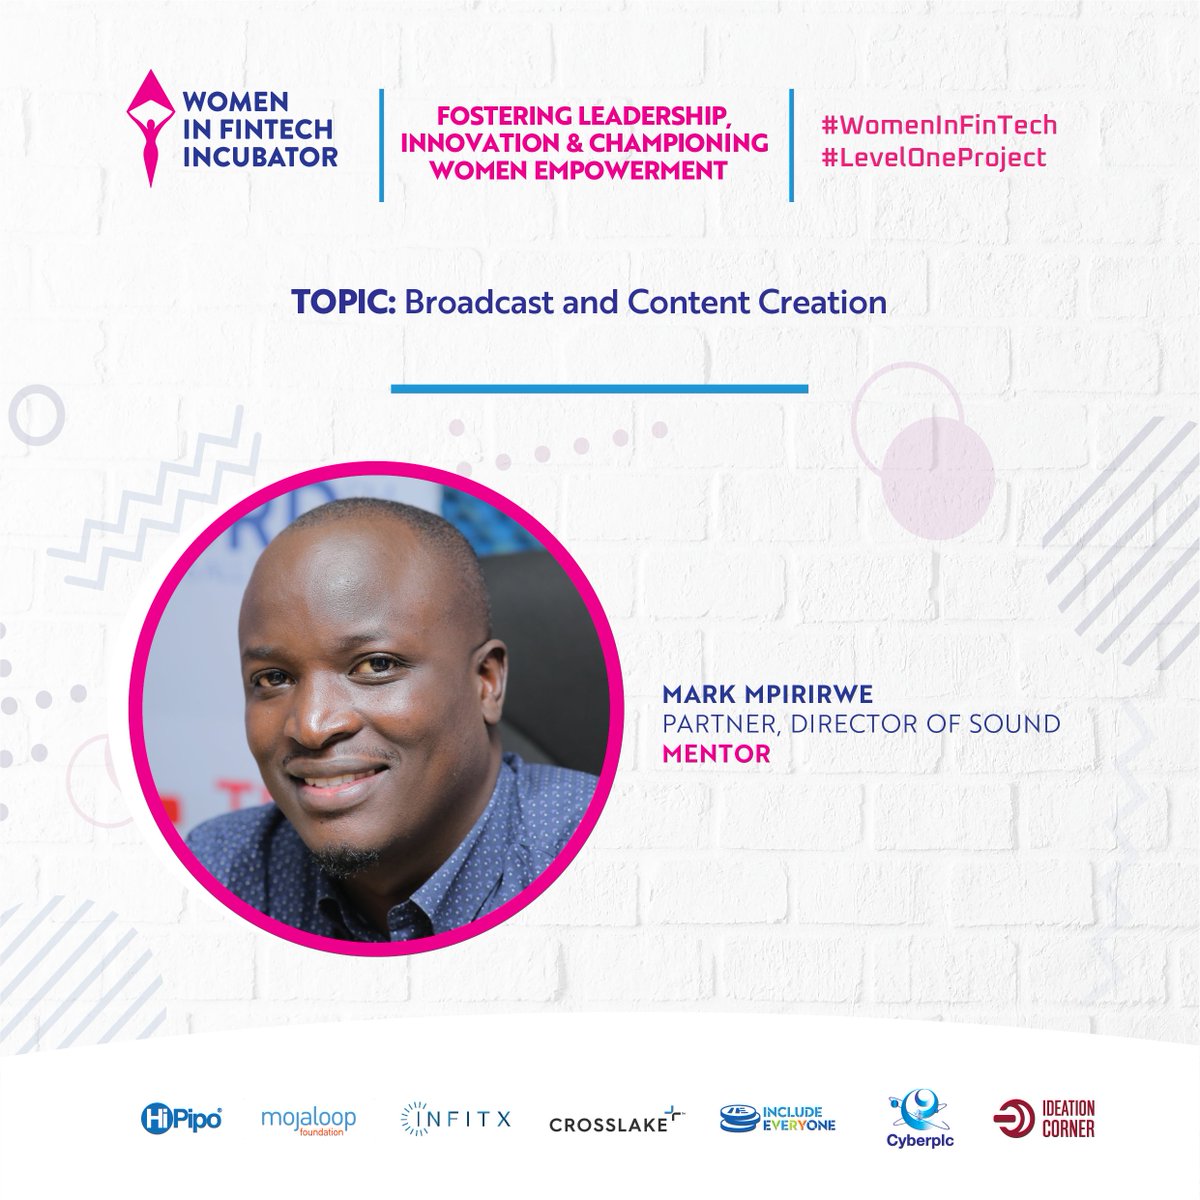 During today's session of the #WomenInFinTech Incubator, Mark Mpirirwe (@XtremeBpm), Partner and Director of Sound at @HiPipo, is leading a mentorship session on 'Broadcast and Content Creation.'
#LevelOneProject